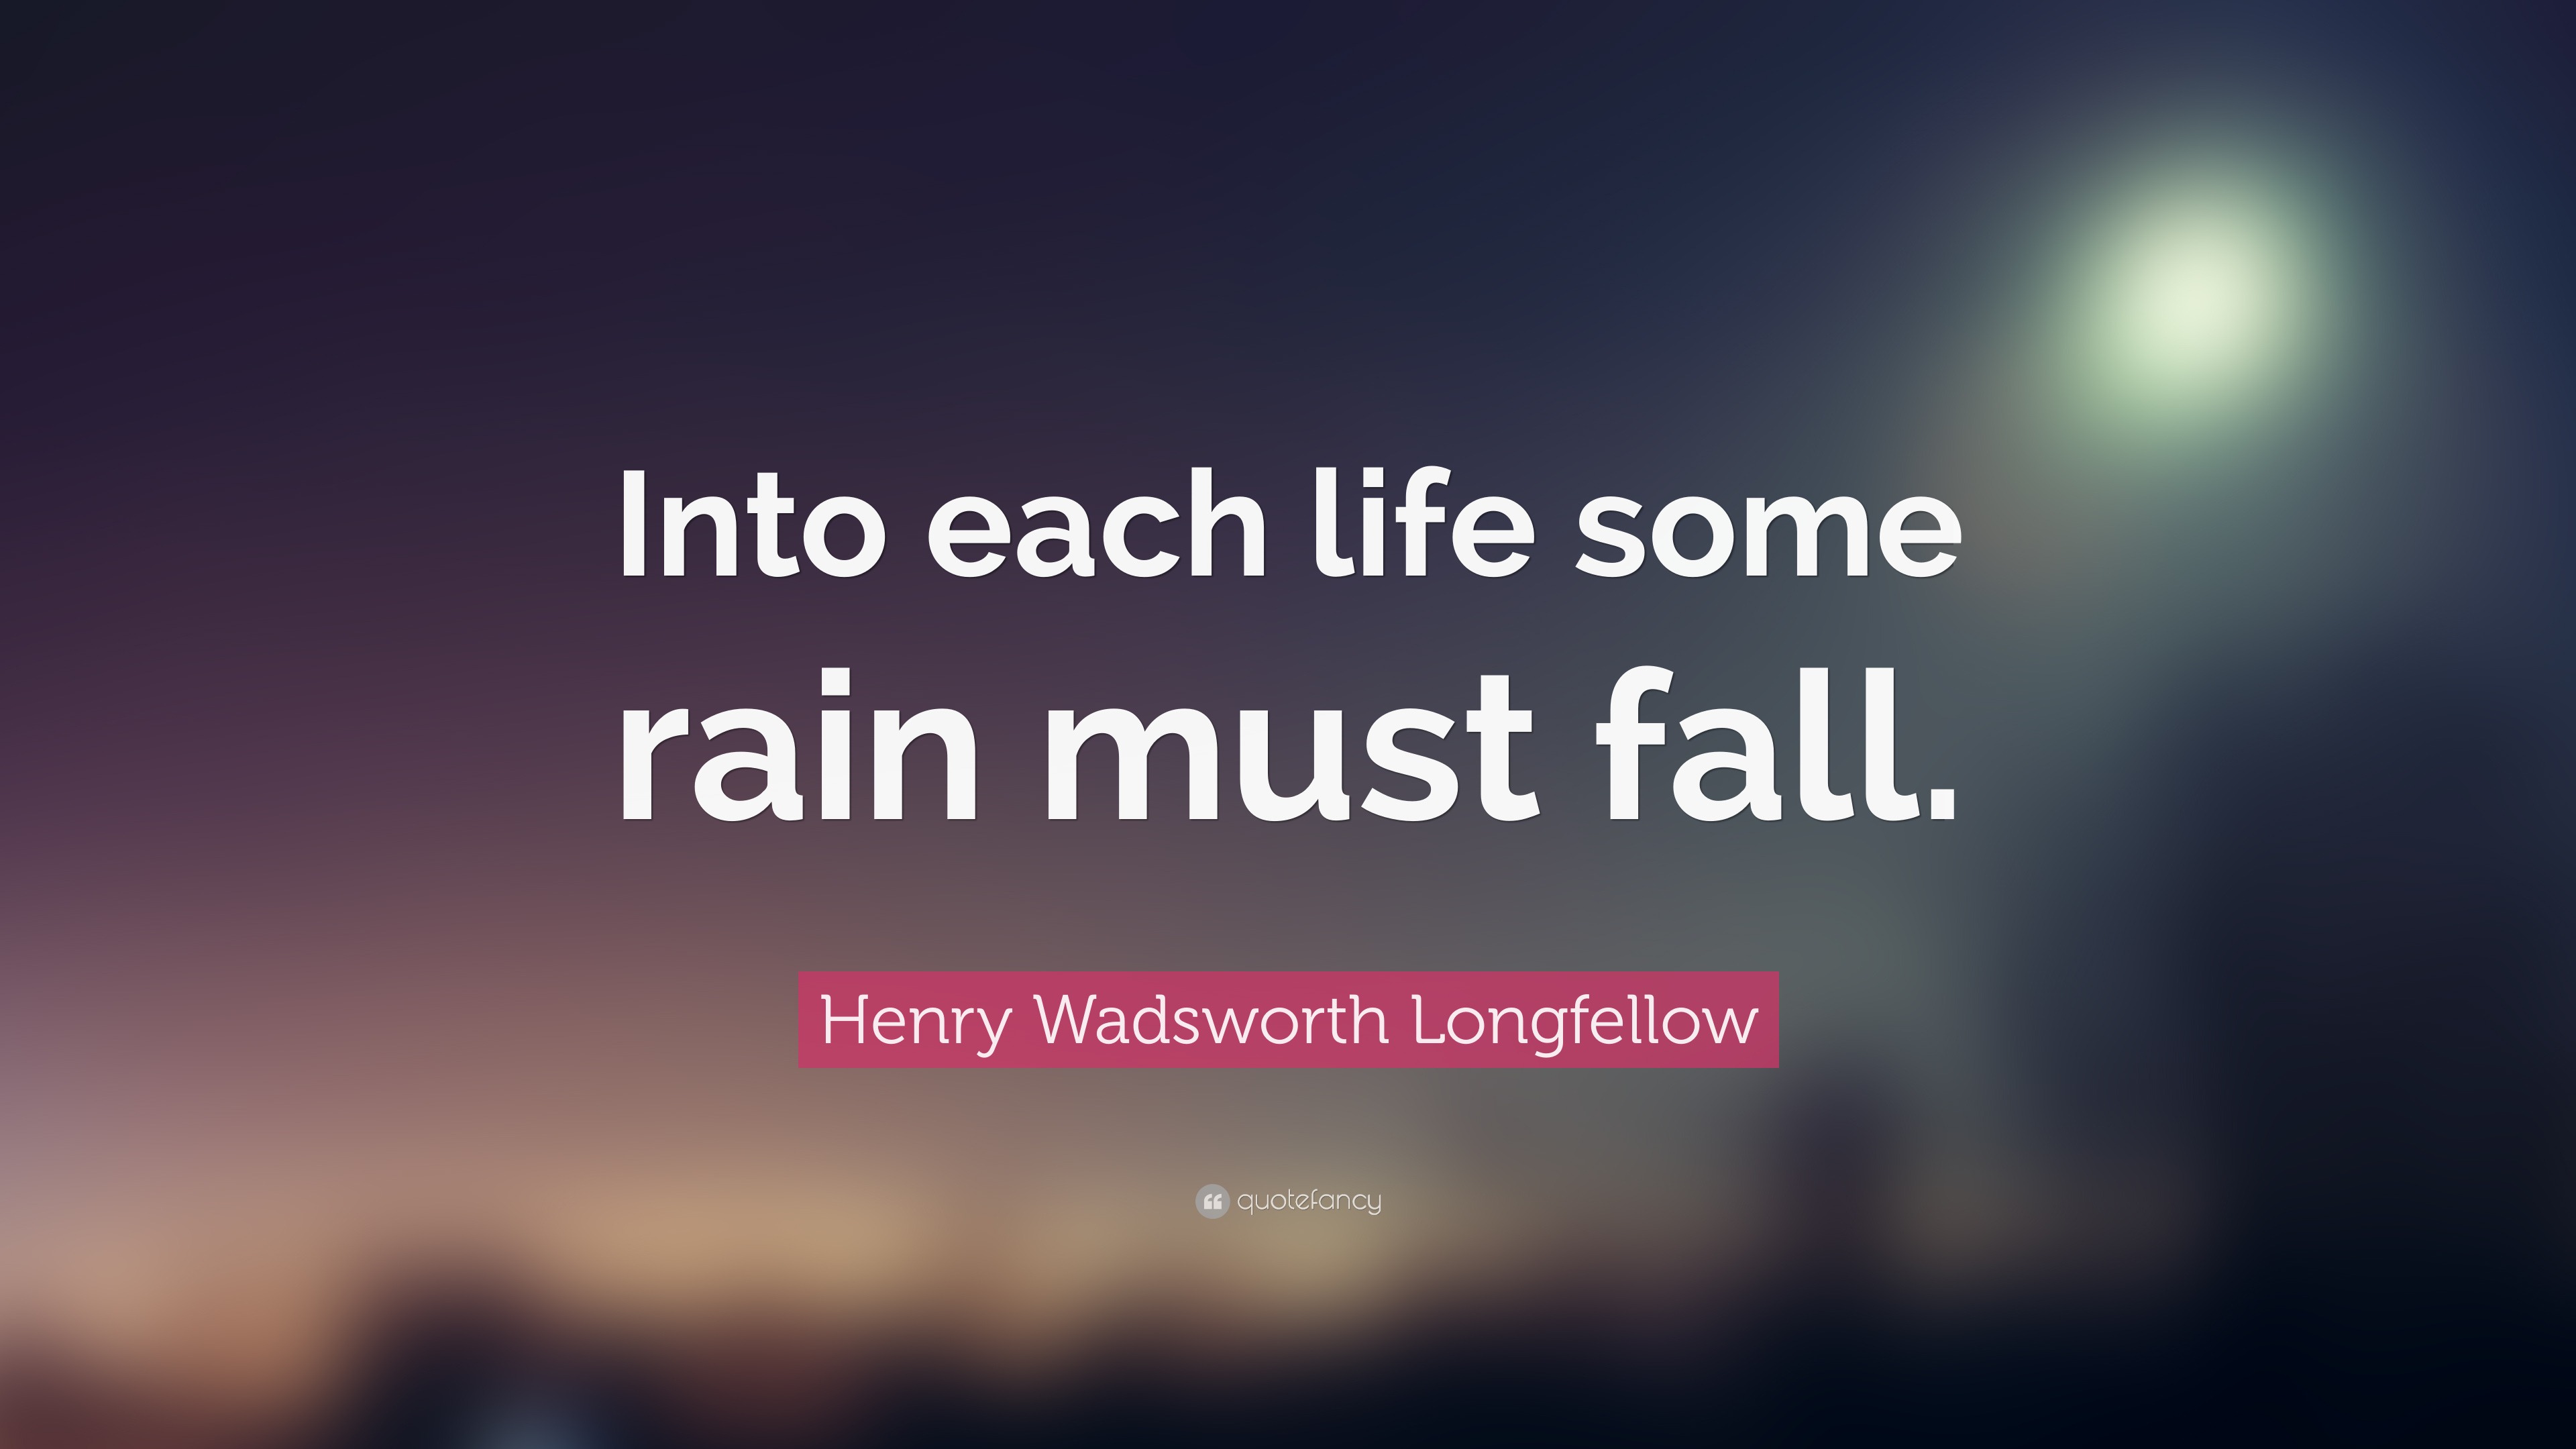 Henry Wadsworth Longfellow Quote: “Into each life some rain must fall.”